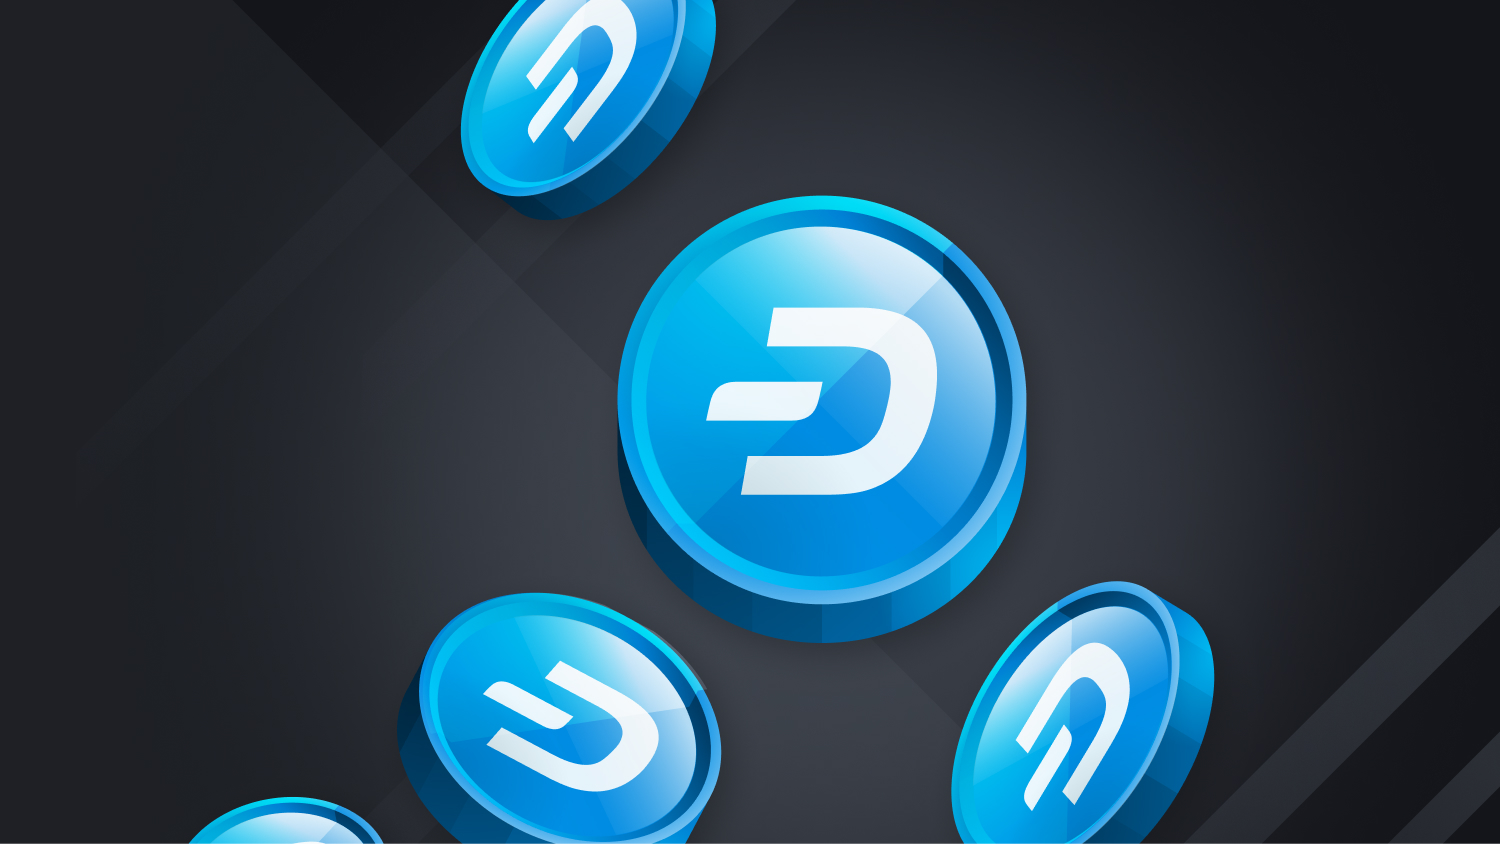 All About Dash